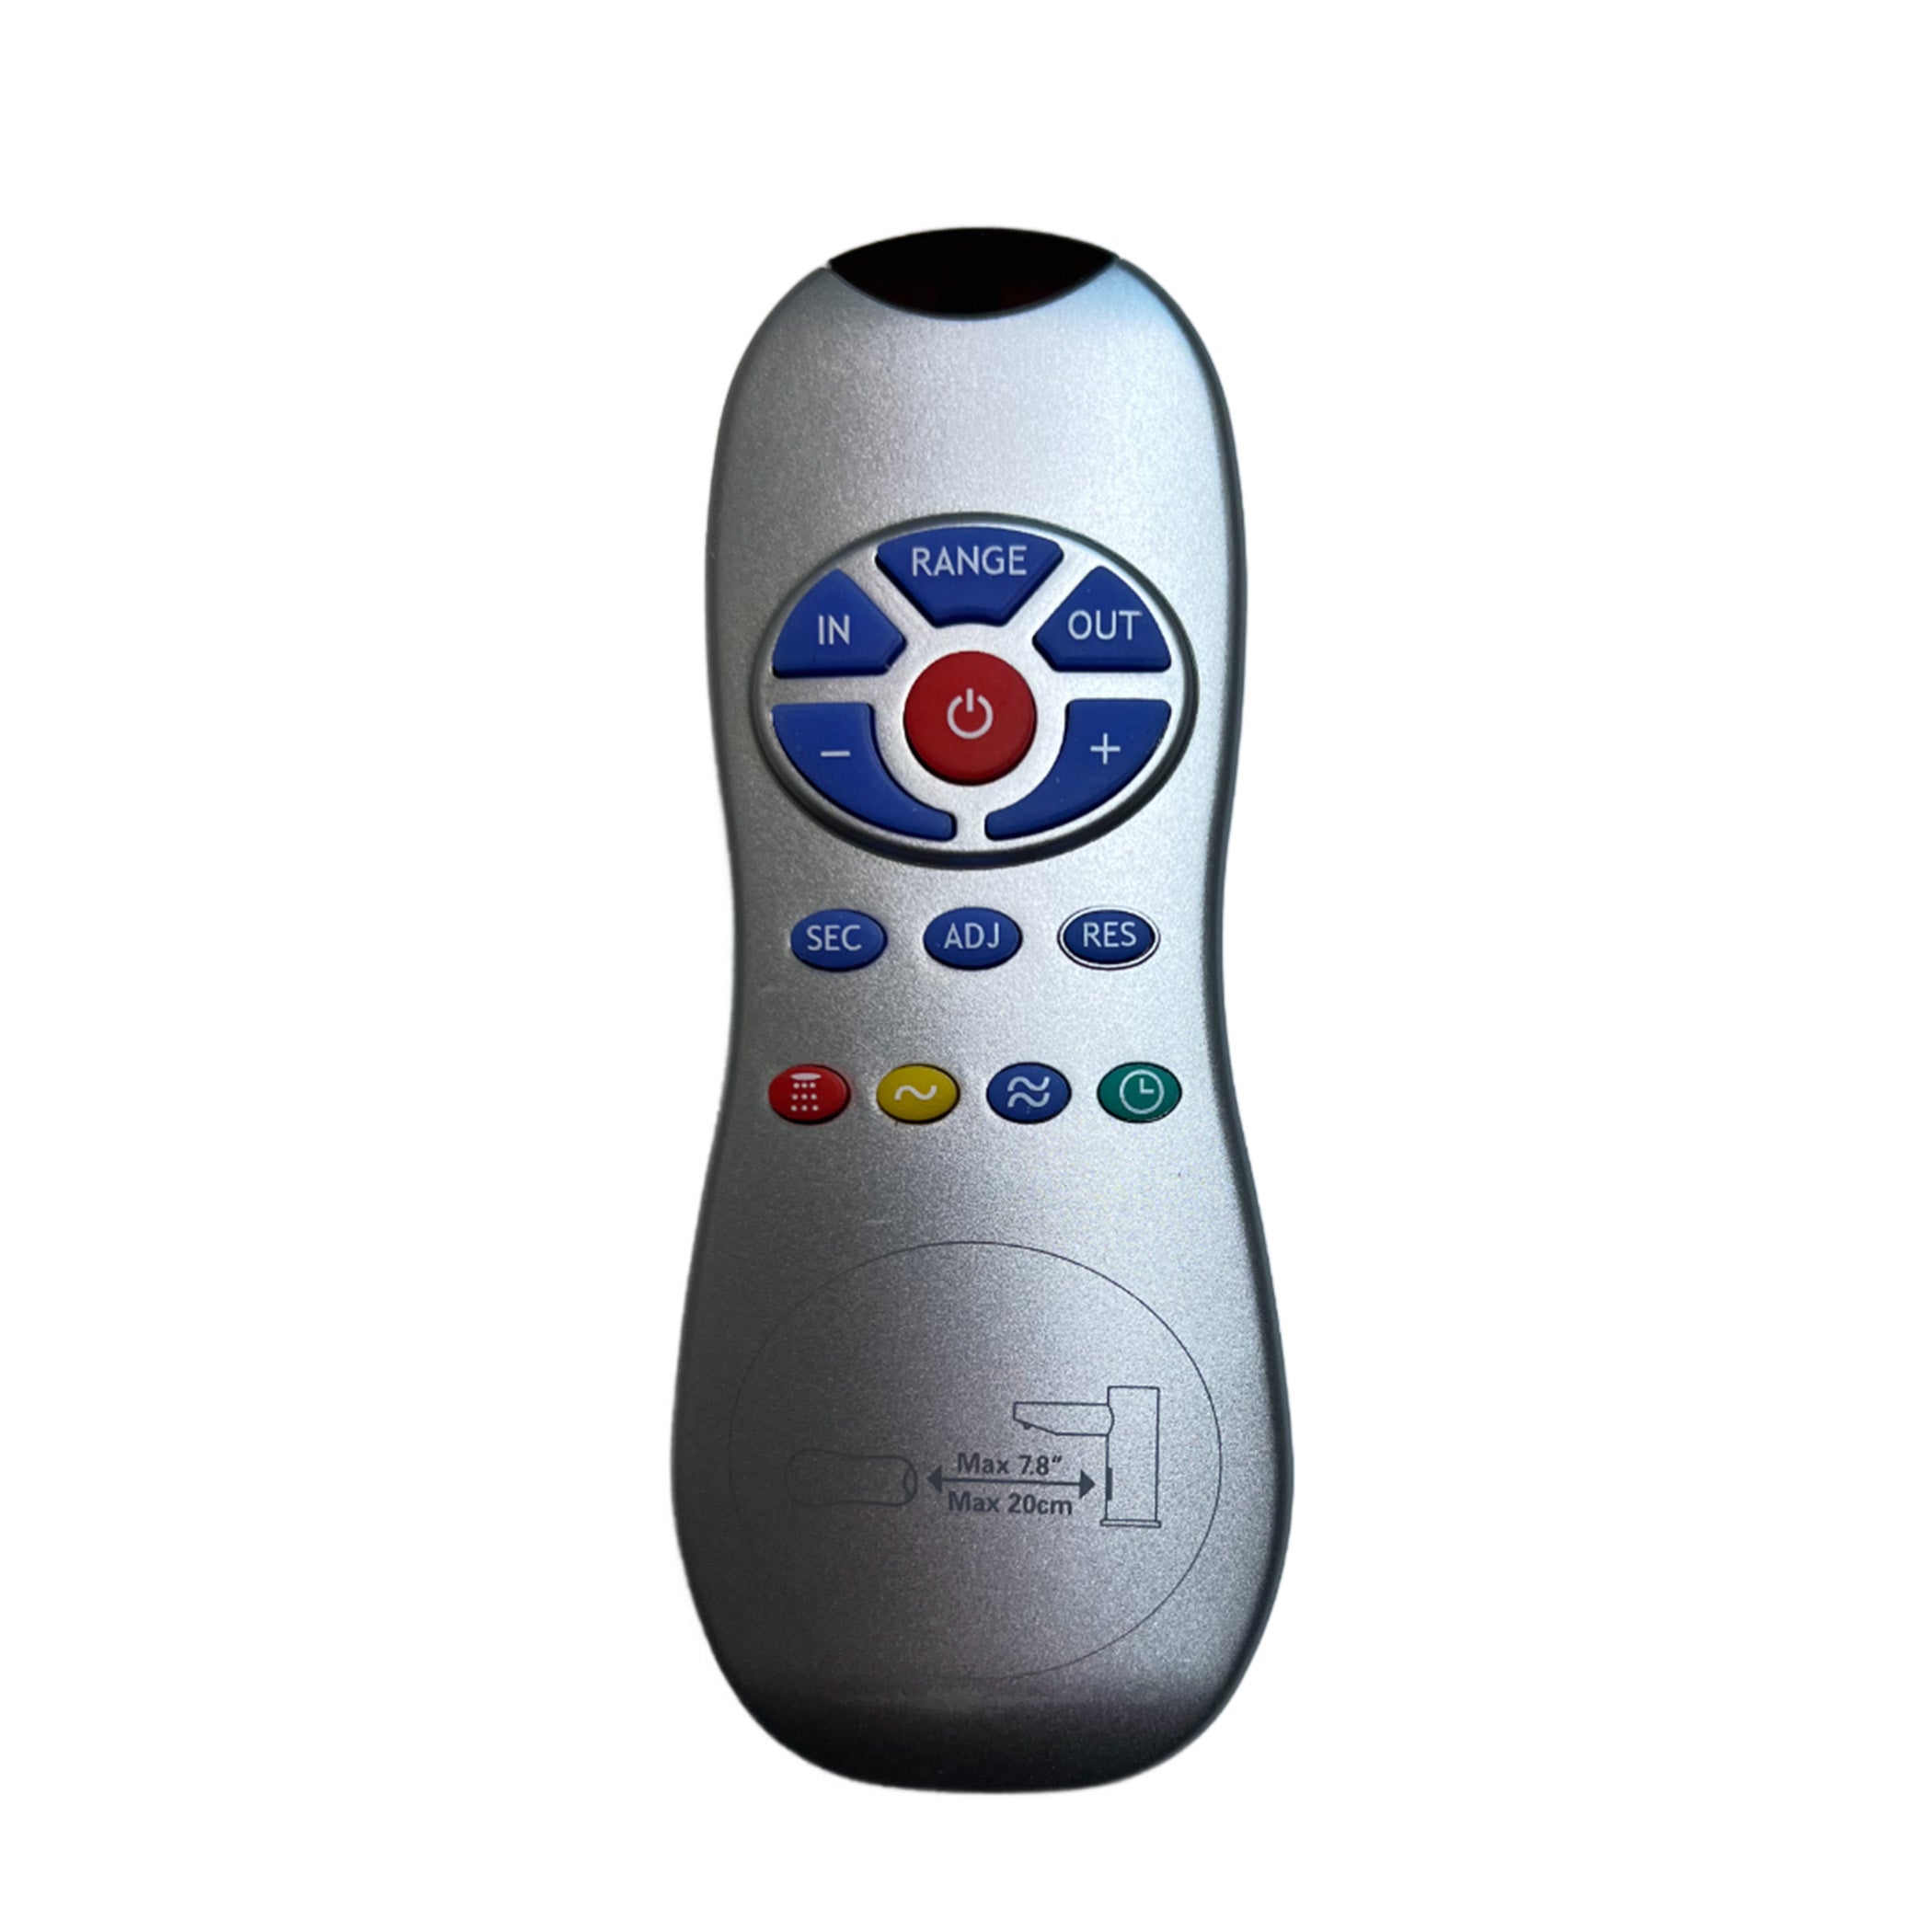 U102080 - Remote Control for Faucets